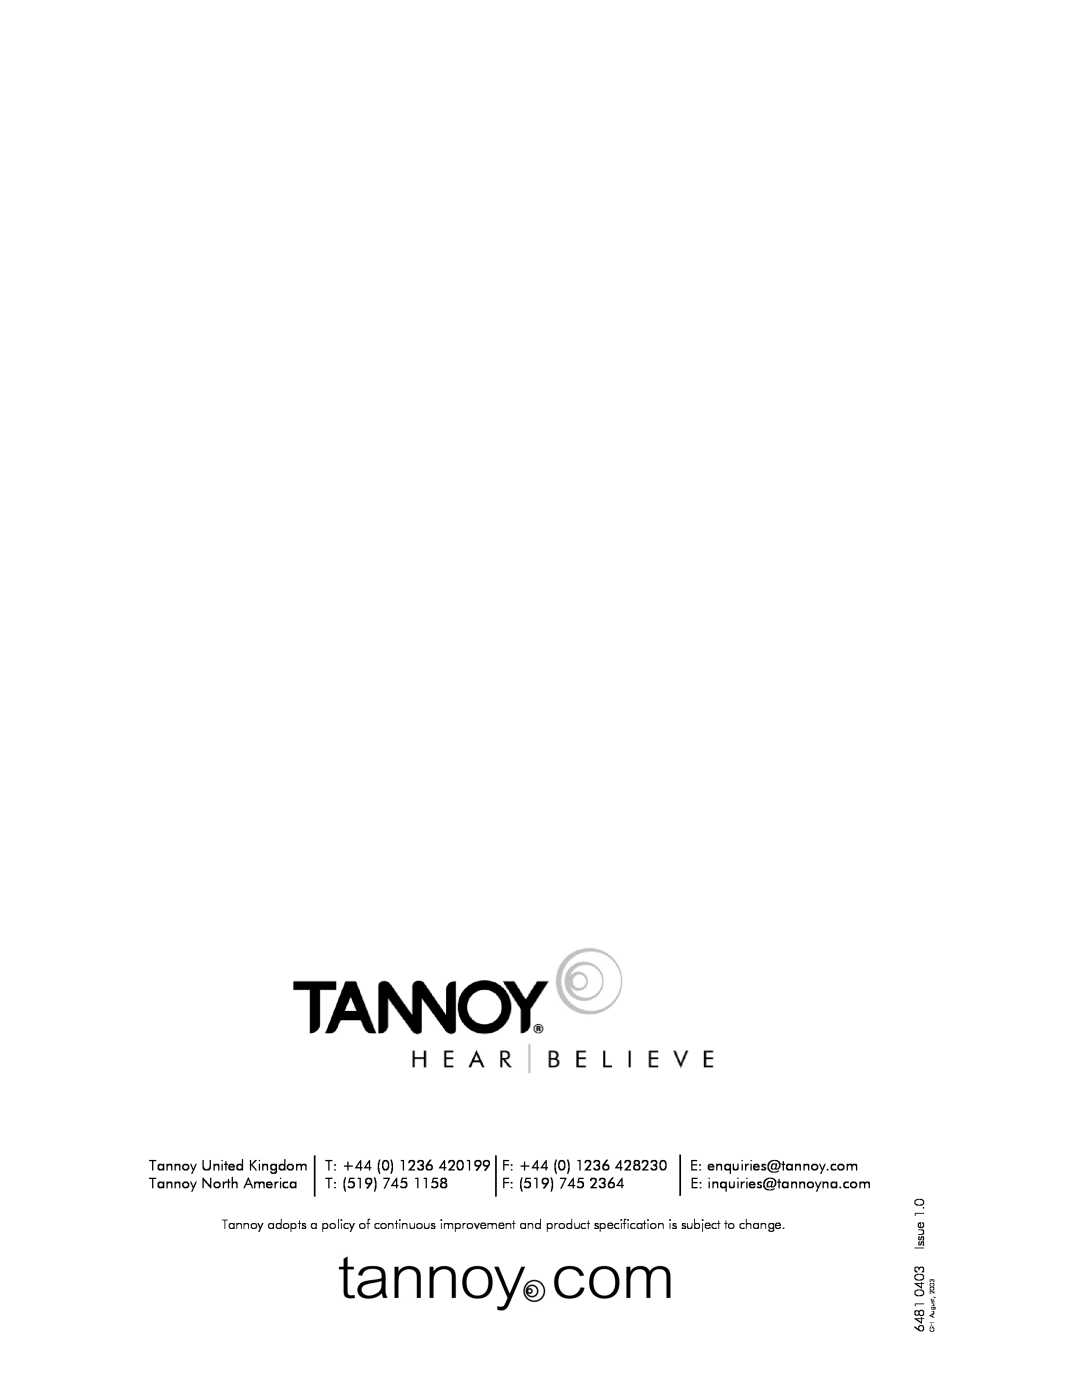 Tannoy V12 HP user manual Tannoy United Kingdom, T +44, F +44, Tannoy North America, 6481 0403 Issue, GH August 